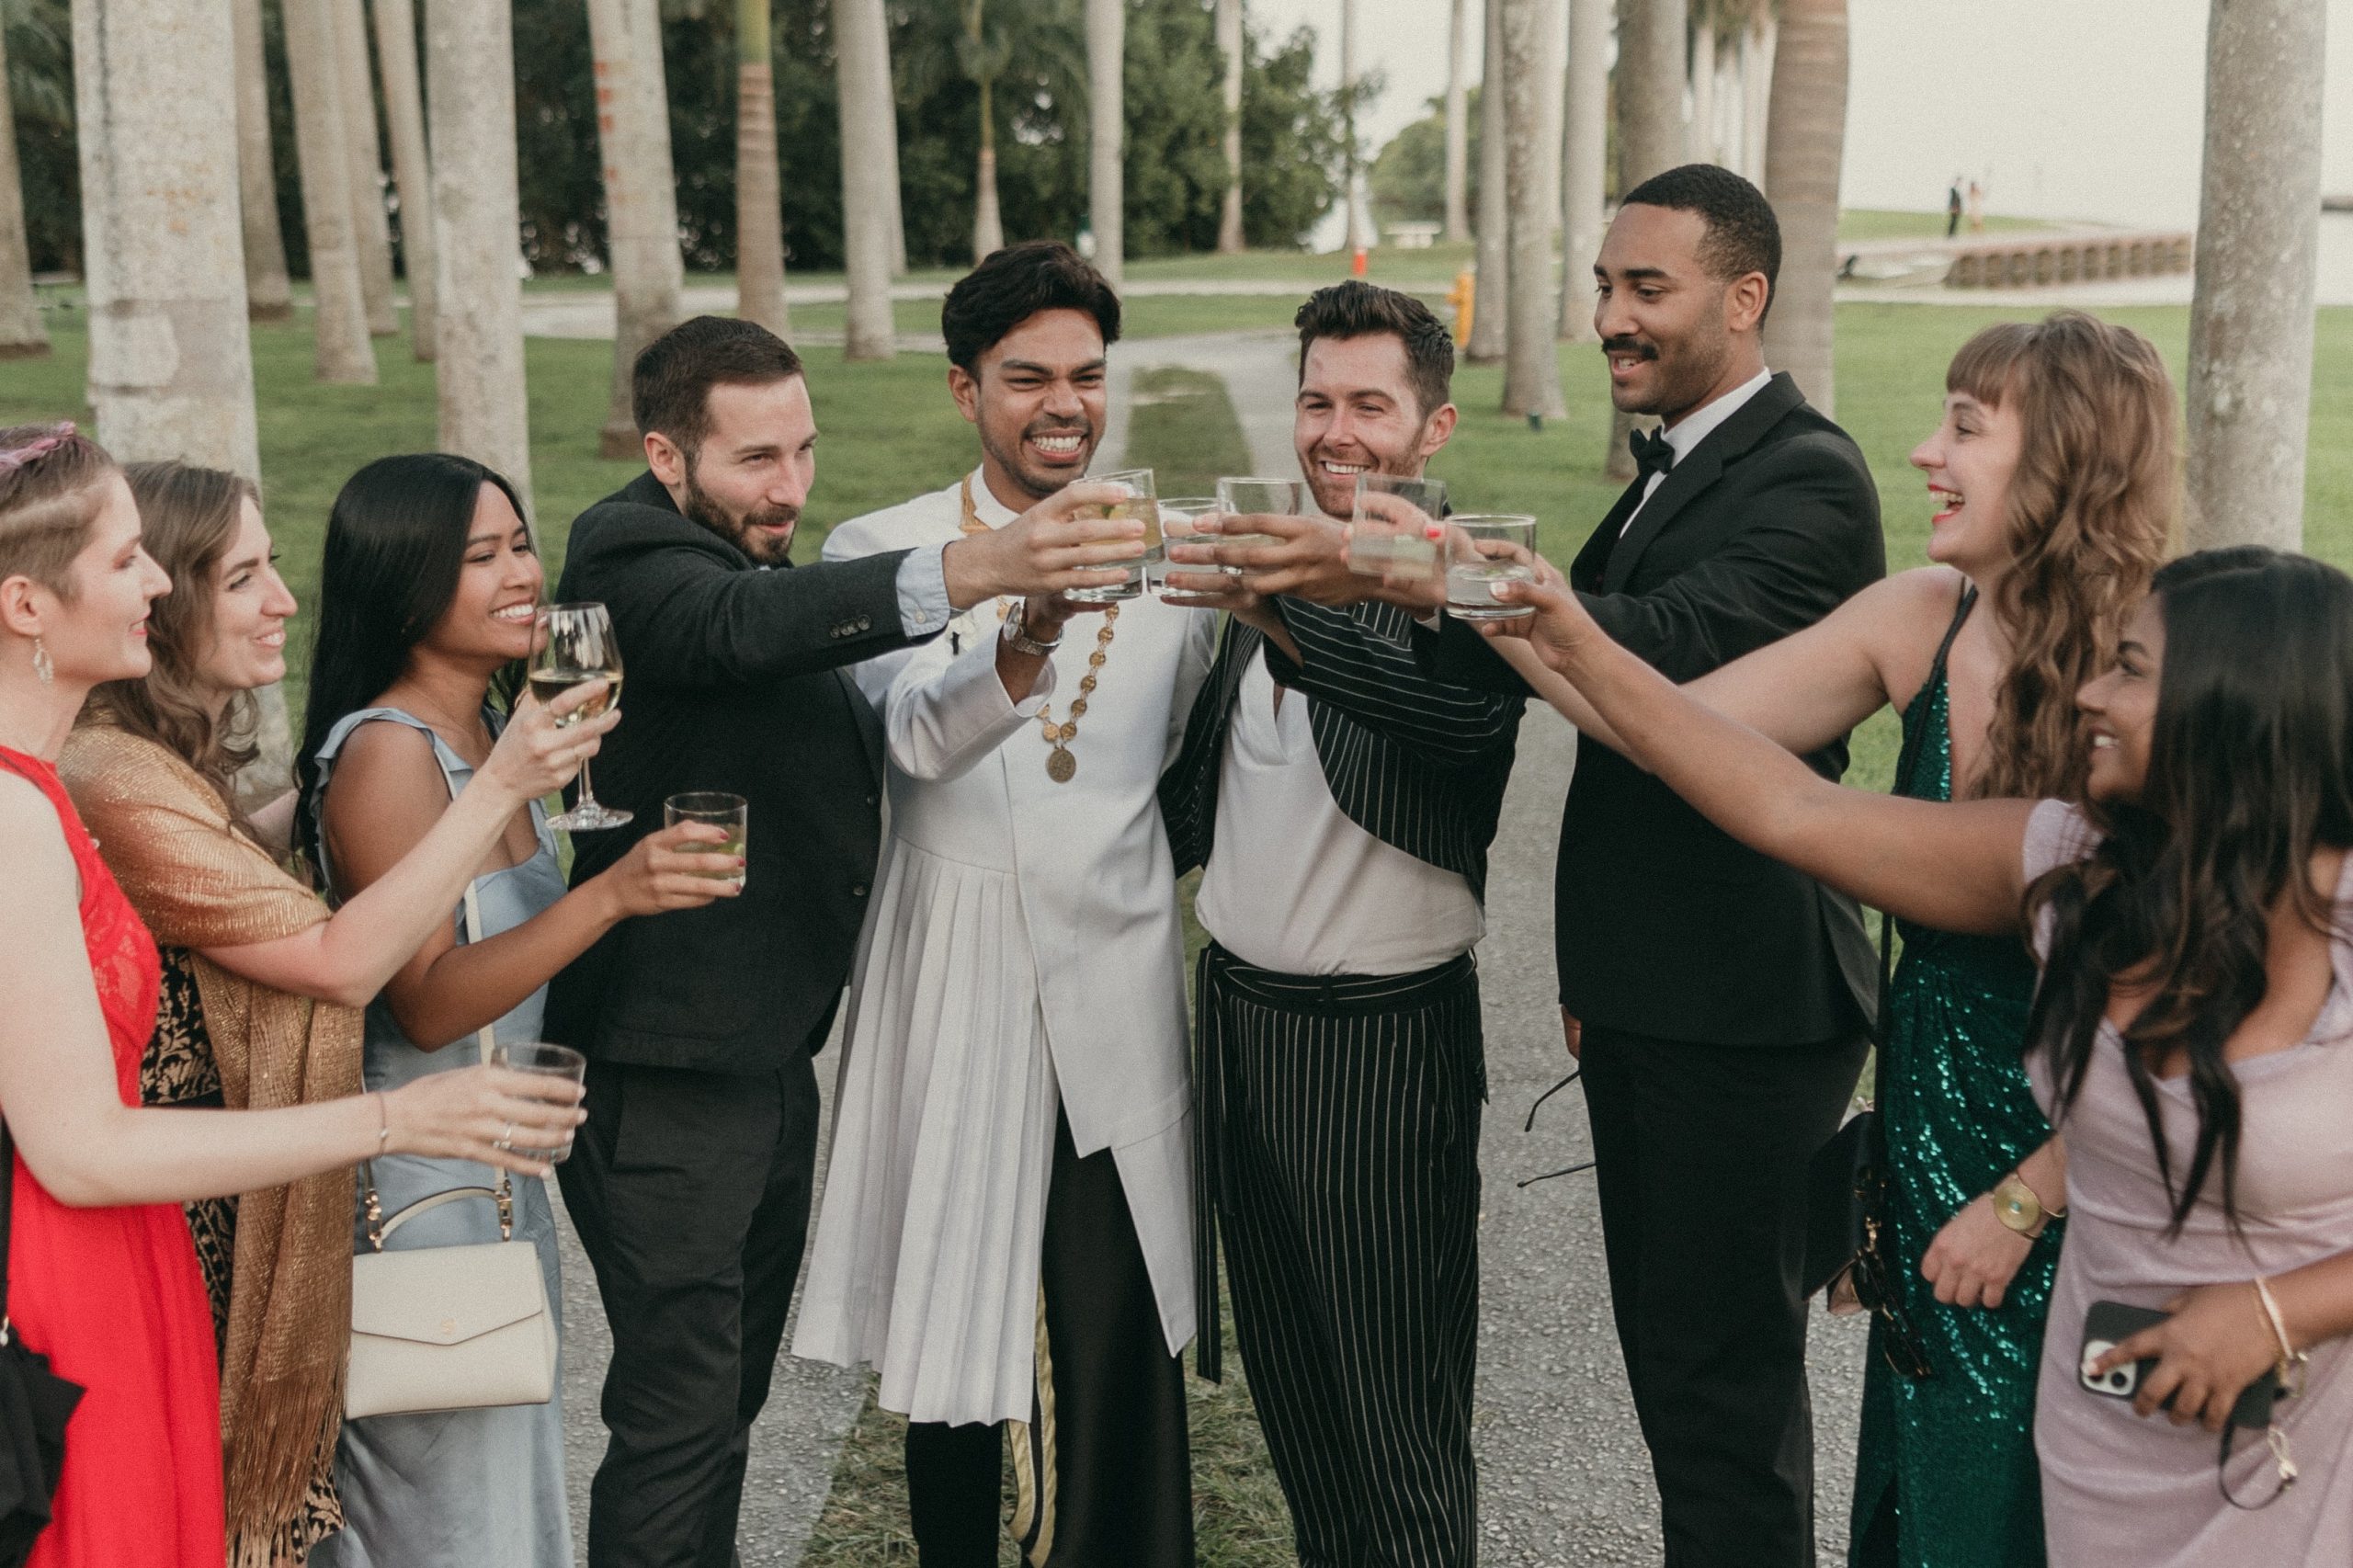 Grooms toasting with some of their wedding guests taking a photo at Deering Estate's Royal Palm Grove